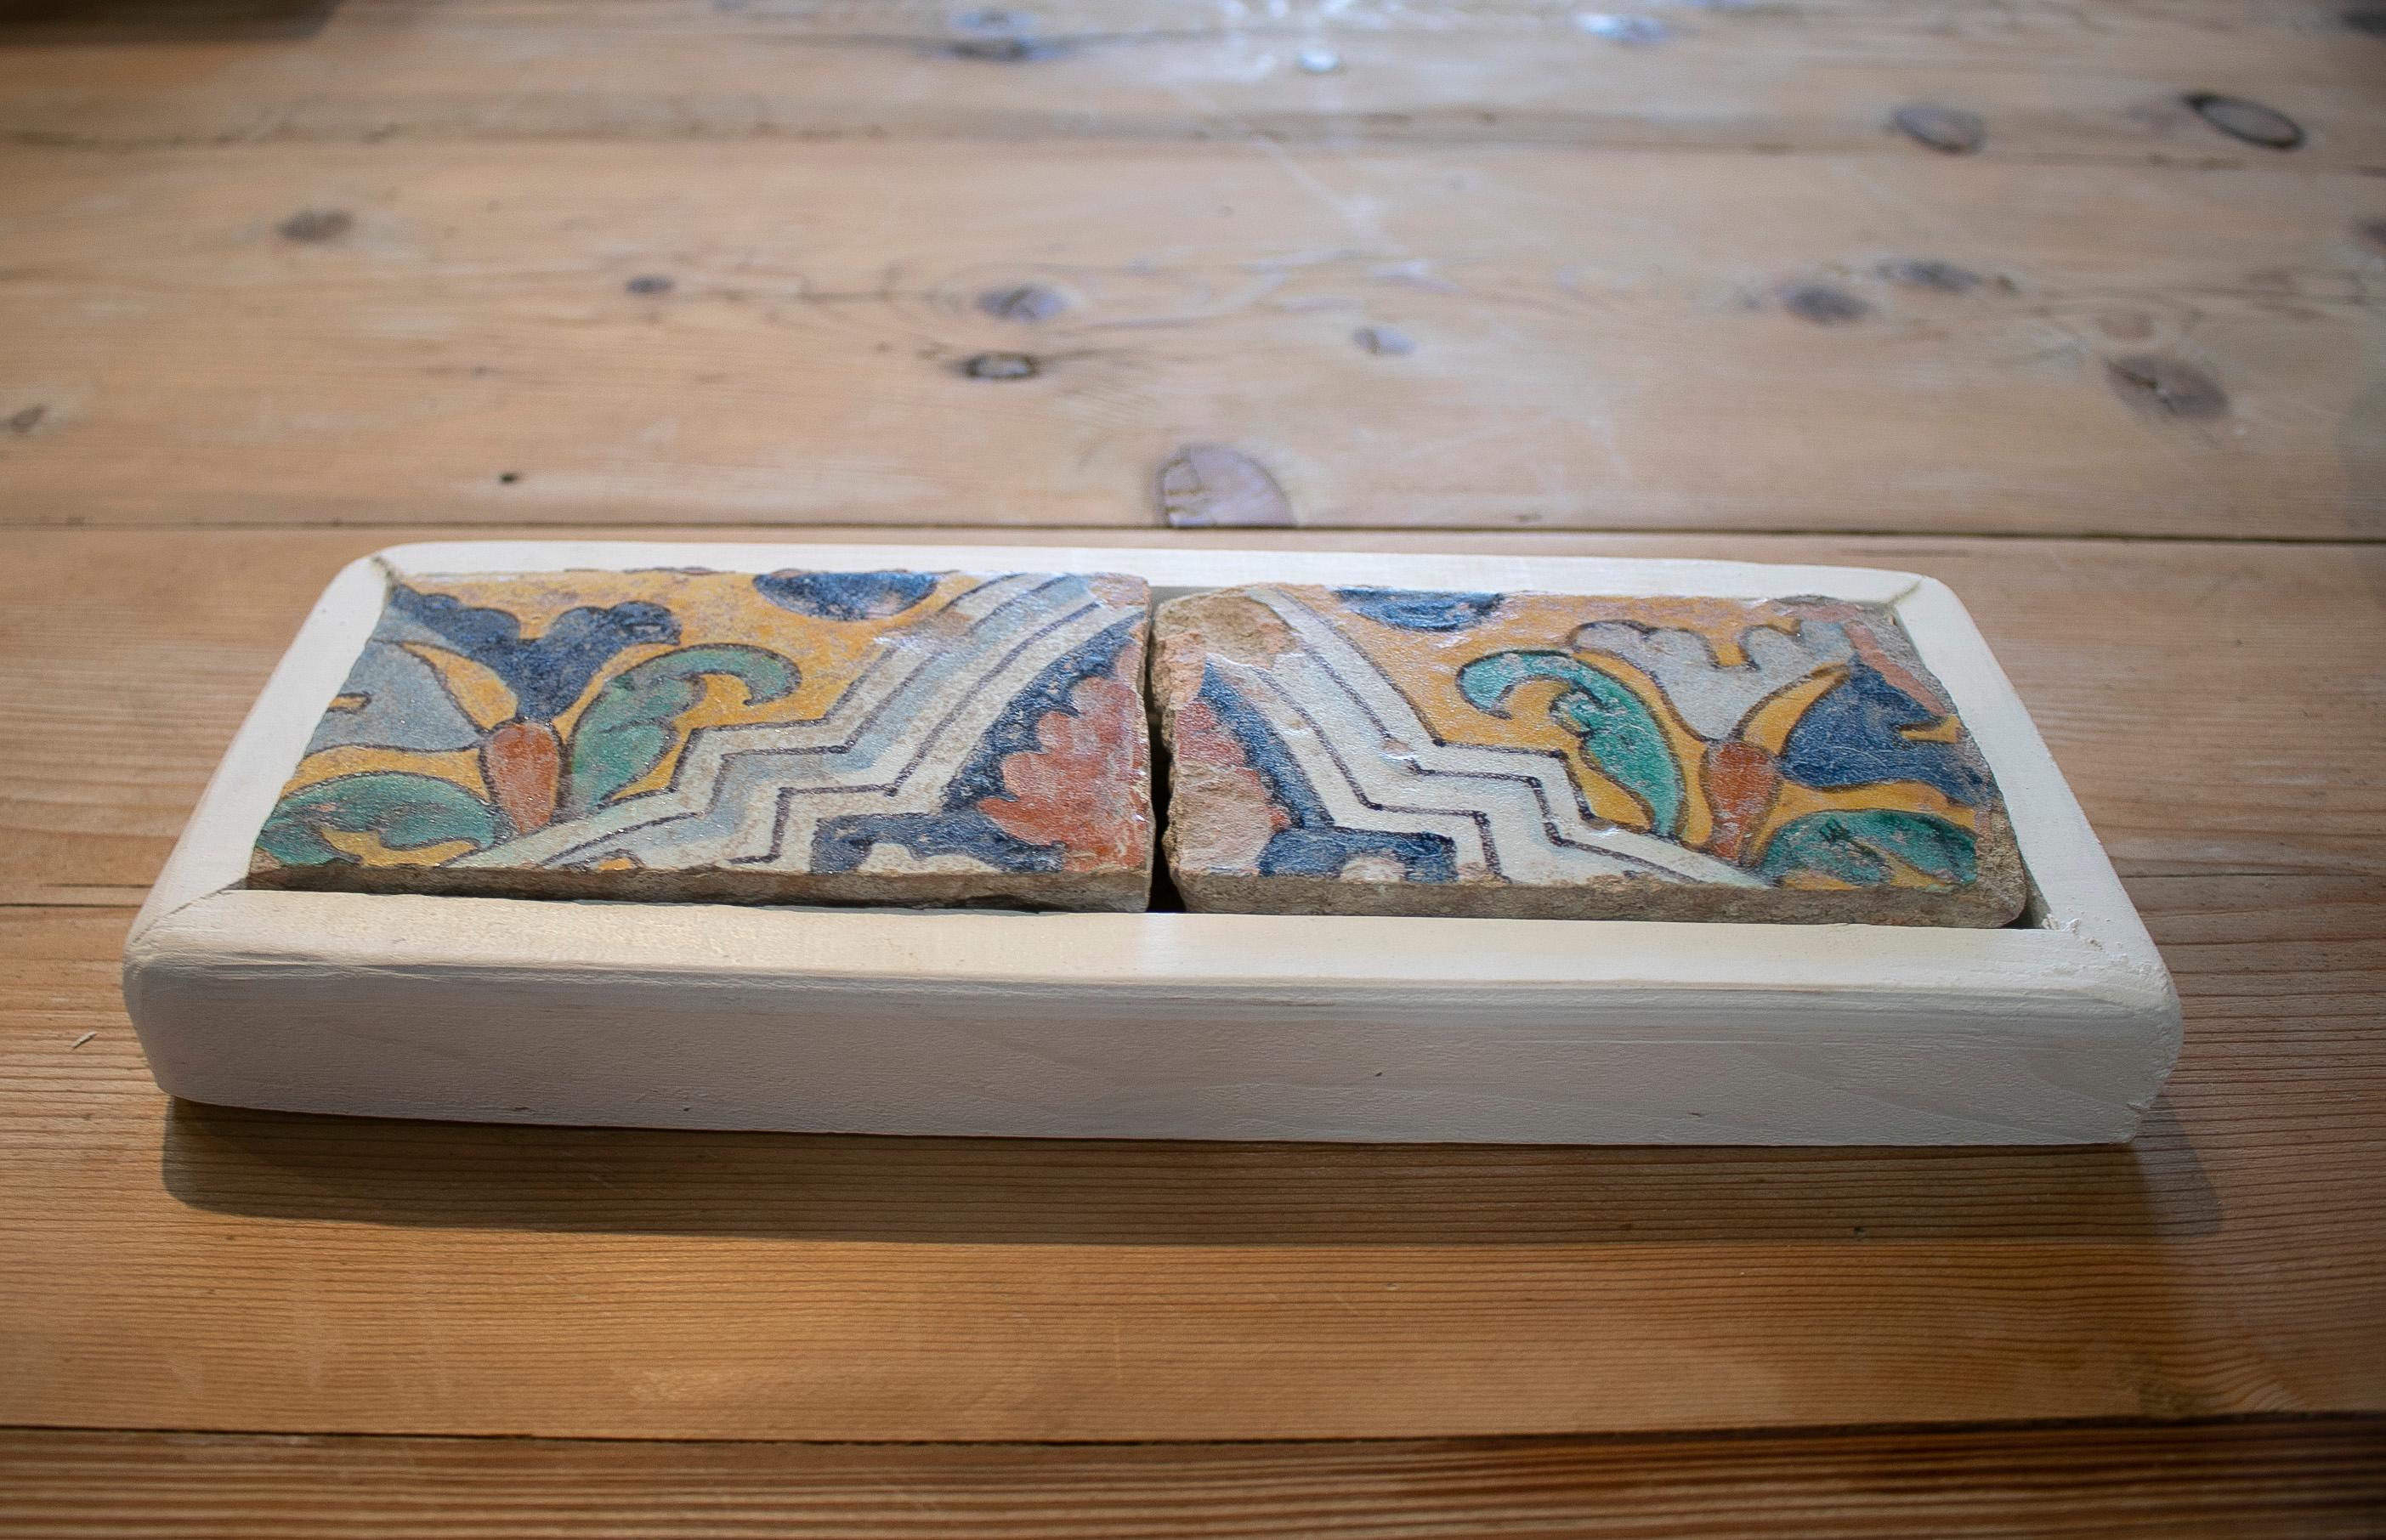 Antique set of two 19th century Spanish hand painted glazed ceramic patterned tiles with white frame

Dimension do not include frame.